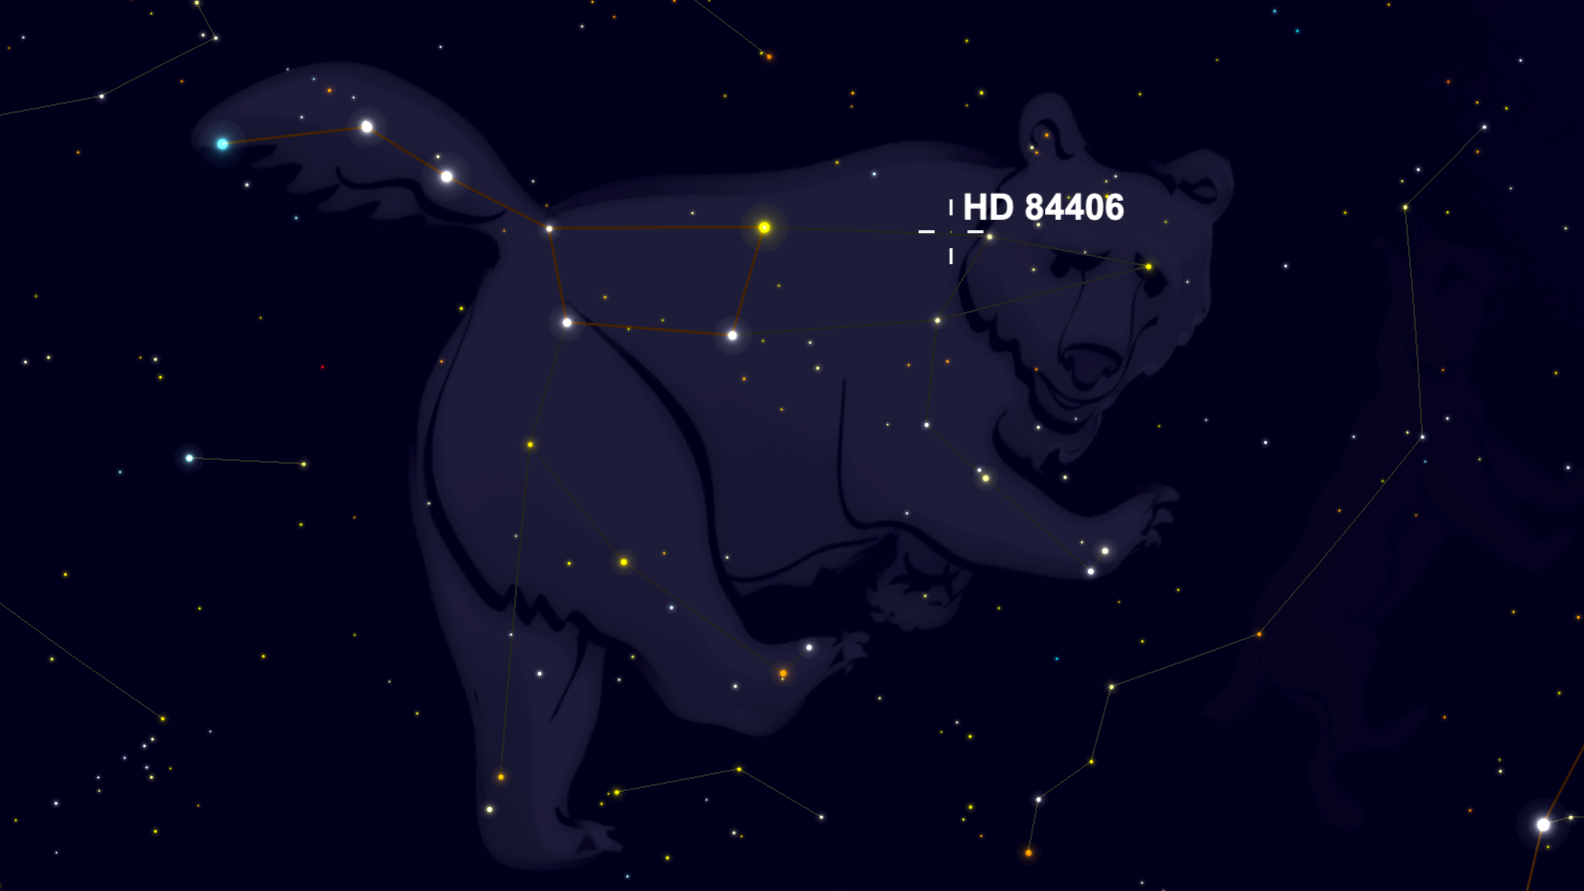 The star HD 84406 is located in the constellation Ursa Major, near the Big Dipper.